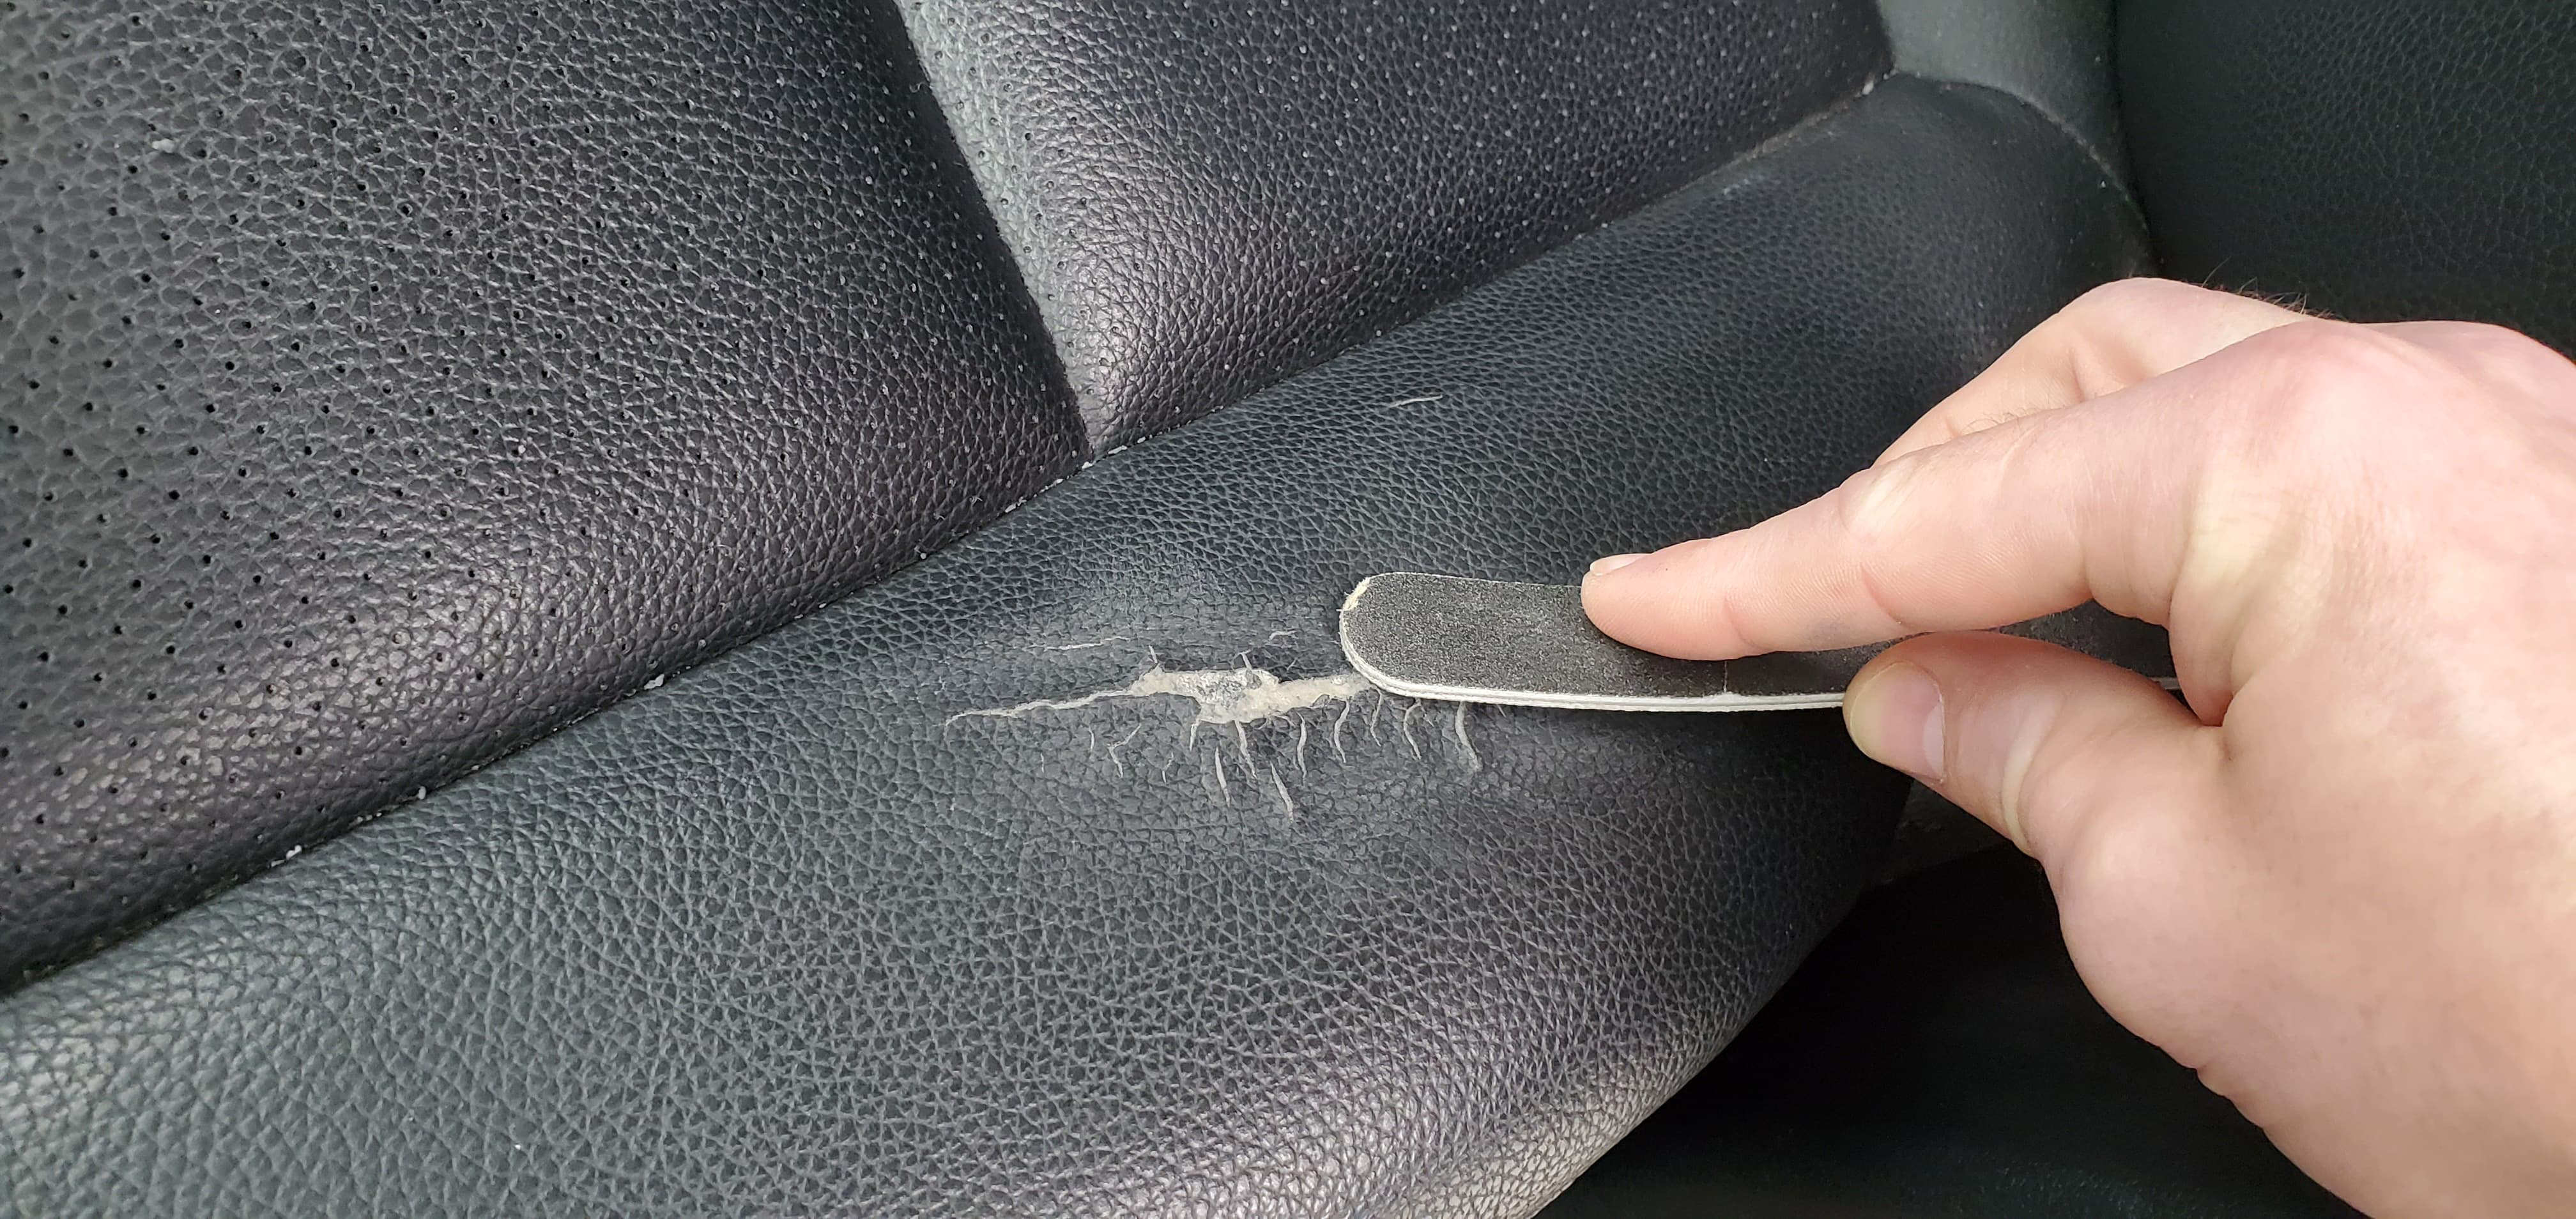 How To Repair A Leather Car Seat - How To Fix Rips In Leather Seats